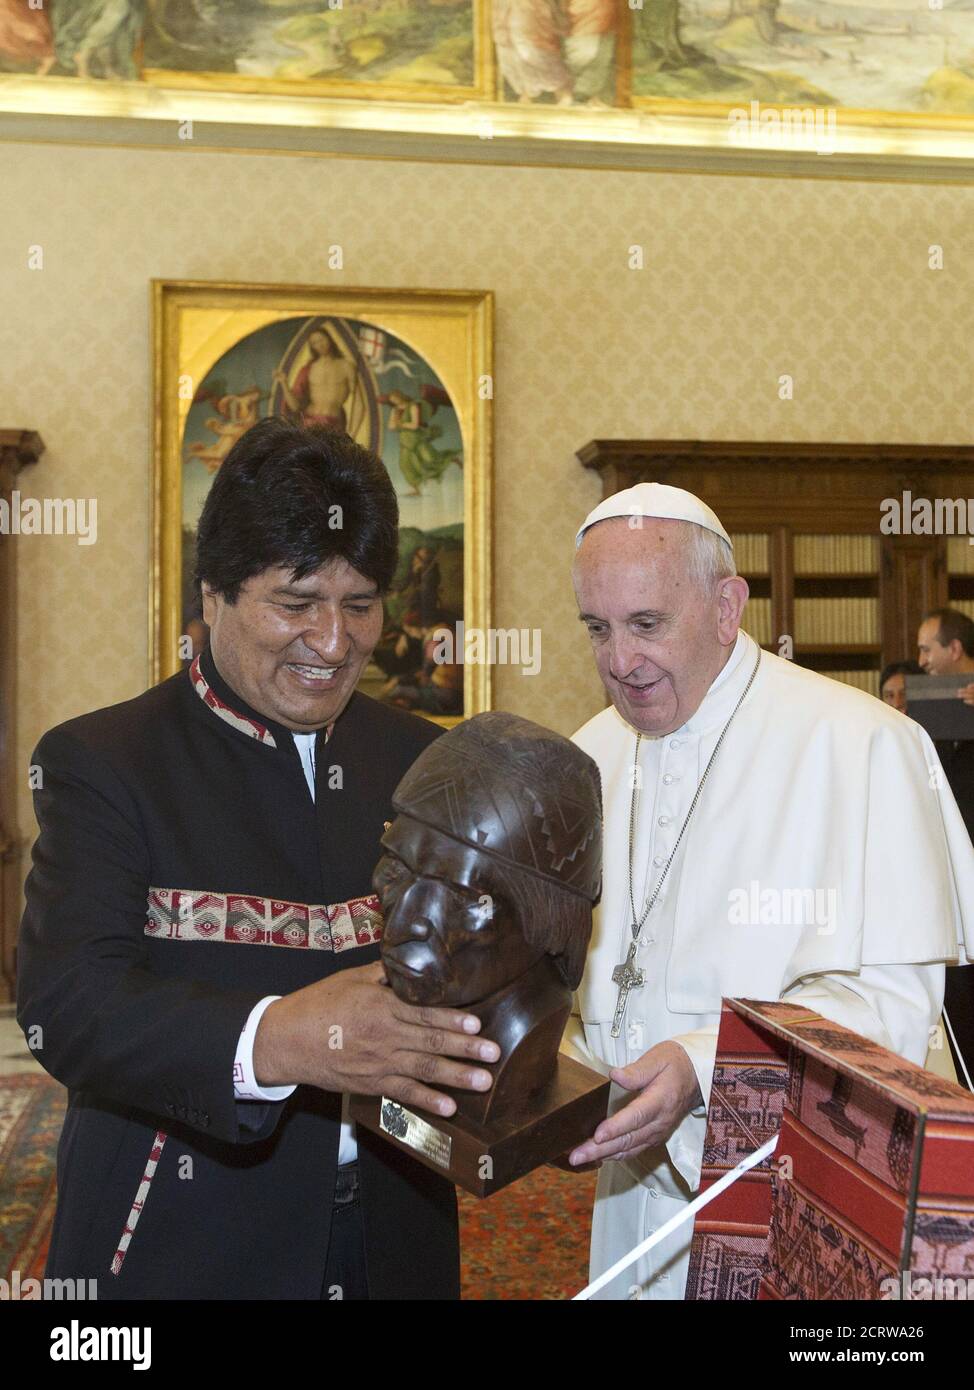 Bolivia's President Evo Morales (L) presents Pope Francis with a  handcrafted bust of Bolivia's indigenous leader Tupac Katari during a  meeting at the Vatican April 15, 2016. REUTERS/Alessandra Tarantino/Pool  Stock Photo -